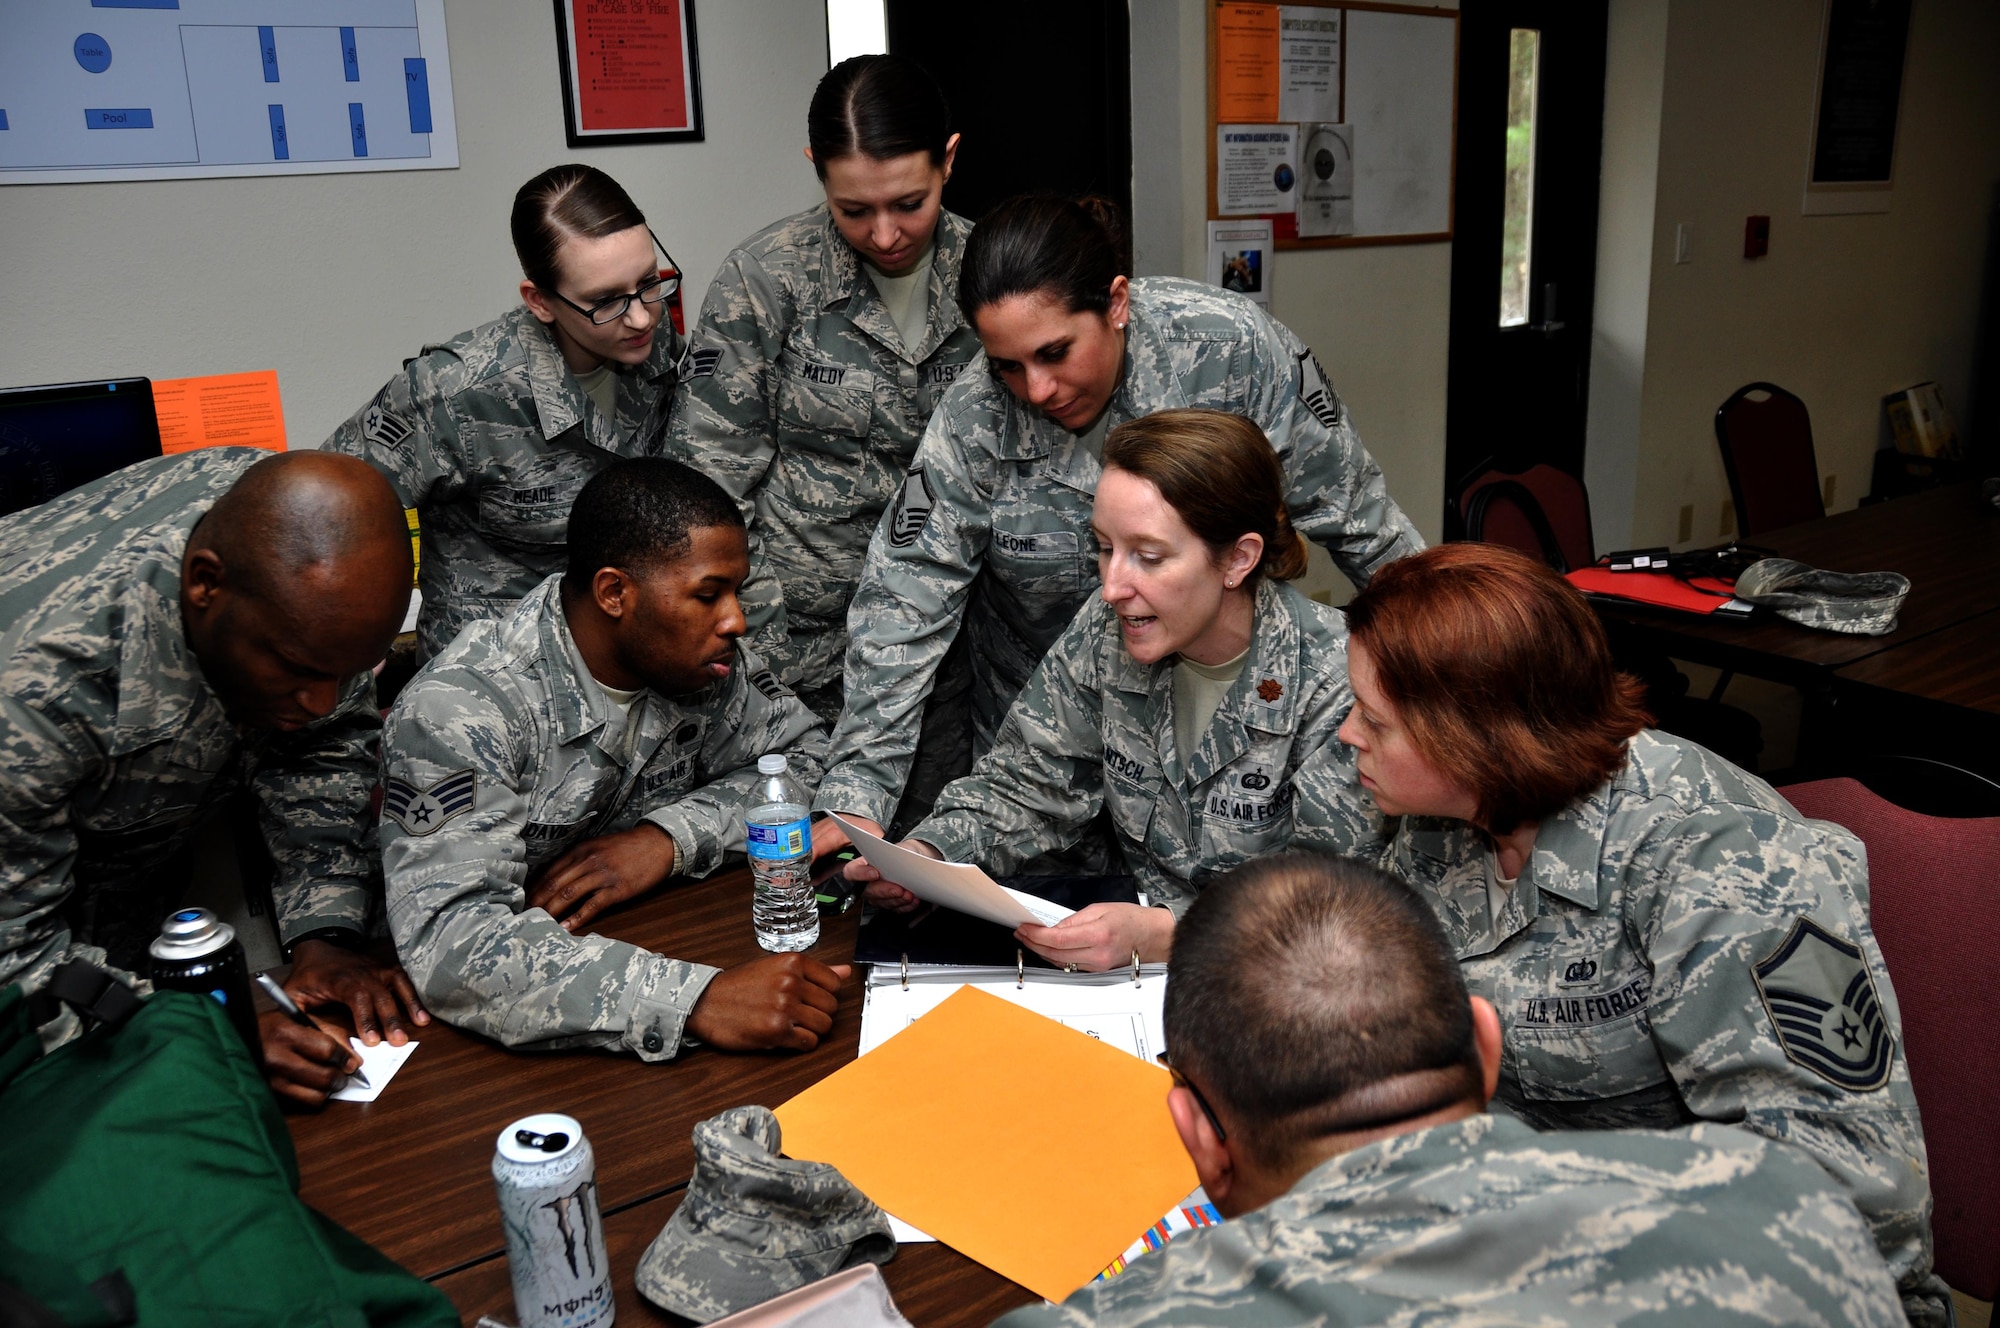 Airmen from the 910th Force Support Squadron from Youngstown Air Reserve Base, Ohio, go over plans to build a bare base from scratch during a table top deployment scenario for Force Support Silver Flag at Dobbins Air Reserve Base, Ga., March 10, 2015. About 70 Airmen on teams from Peterson Air Force Base, Colorado; the 445th FSS from Wright-Patterson Air Force Base, Ohio; the 908th FSS from Maxwell AFB, Alabama; the 910th FSS from Youngstown ARB, Ohio; the 911th FSS from Pittsburgh, Pennsylvania; and the 934th FSS from Minneapolis – St. Paul, Minnesota competed in FS Silver Flag. (U.S. Air Force photo/Senior Airman Daniel Phelps)